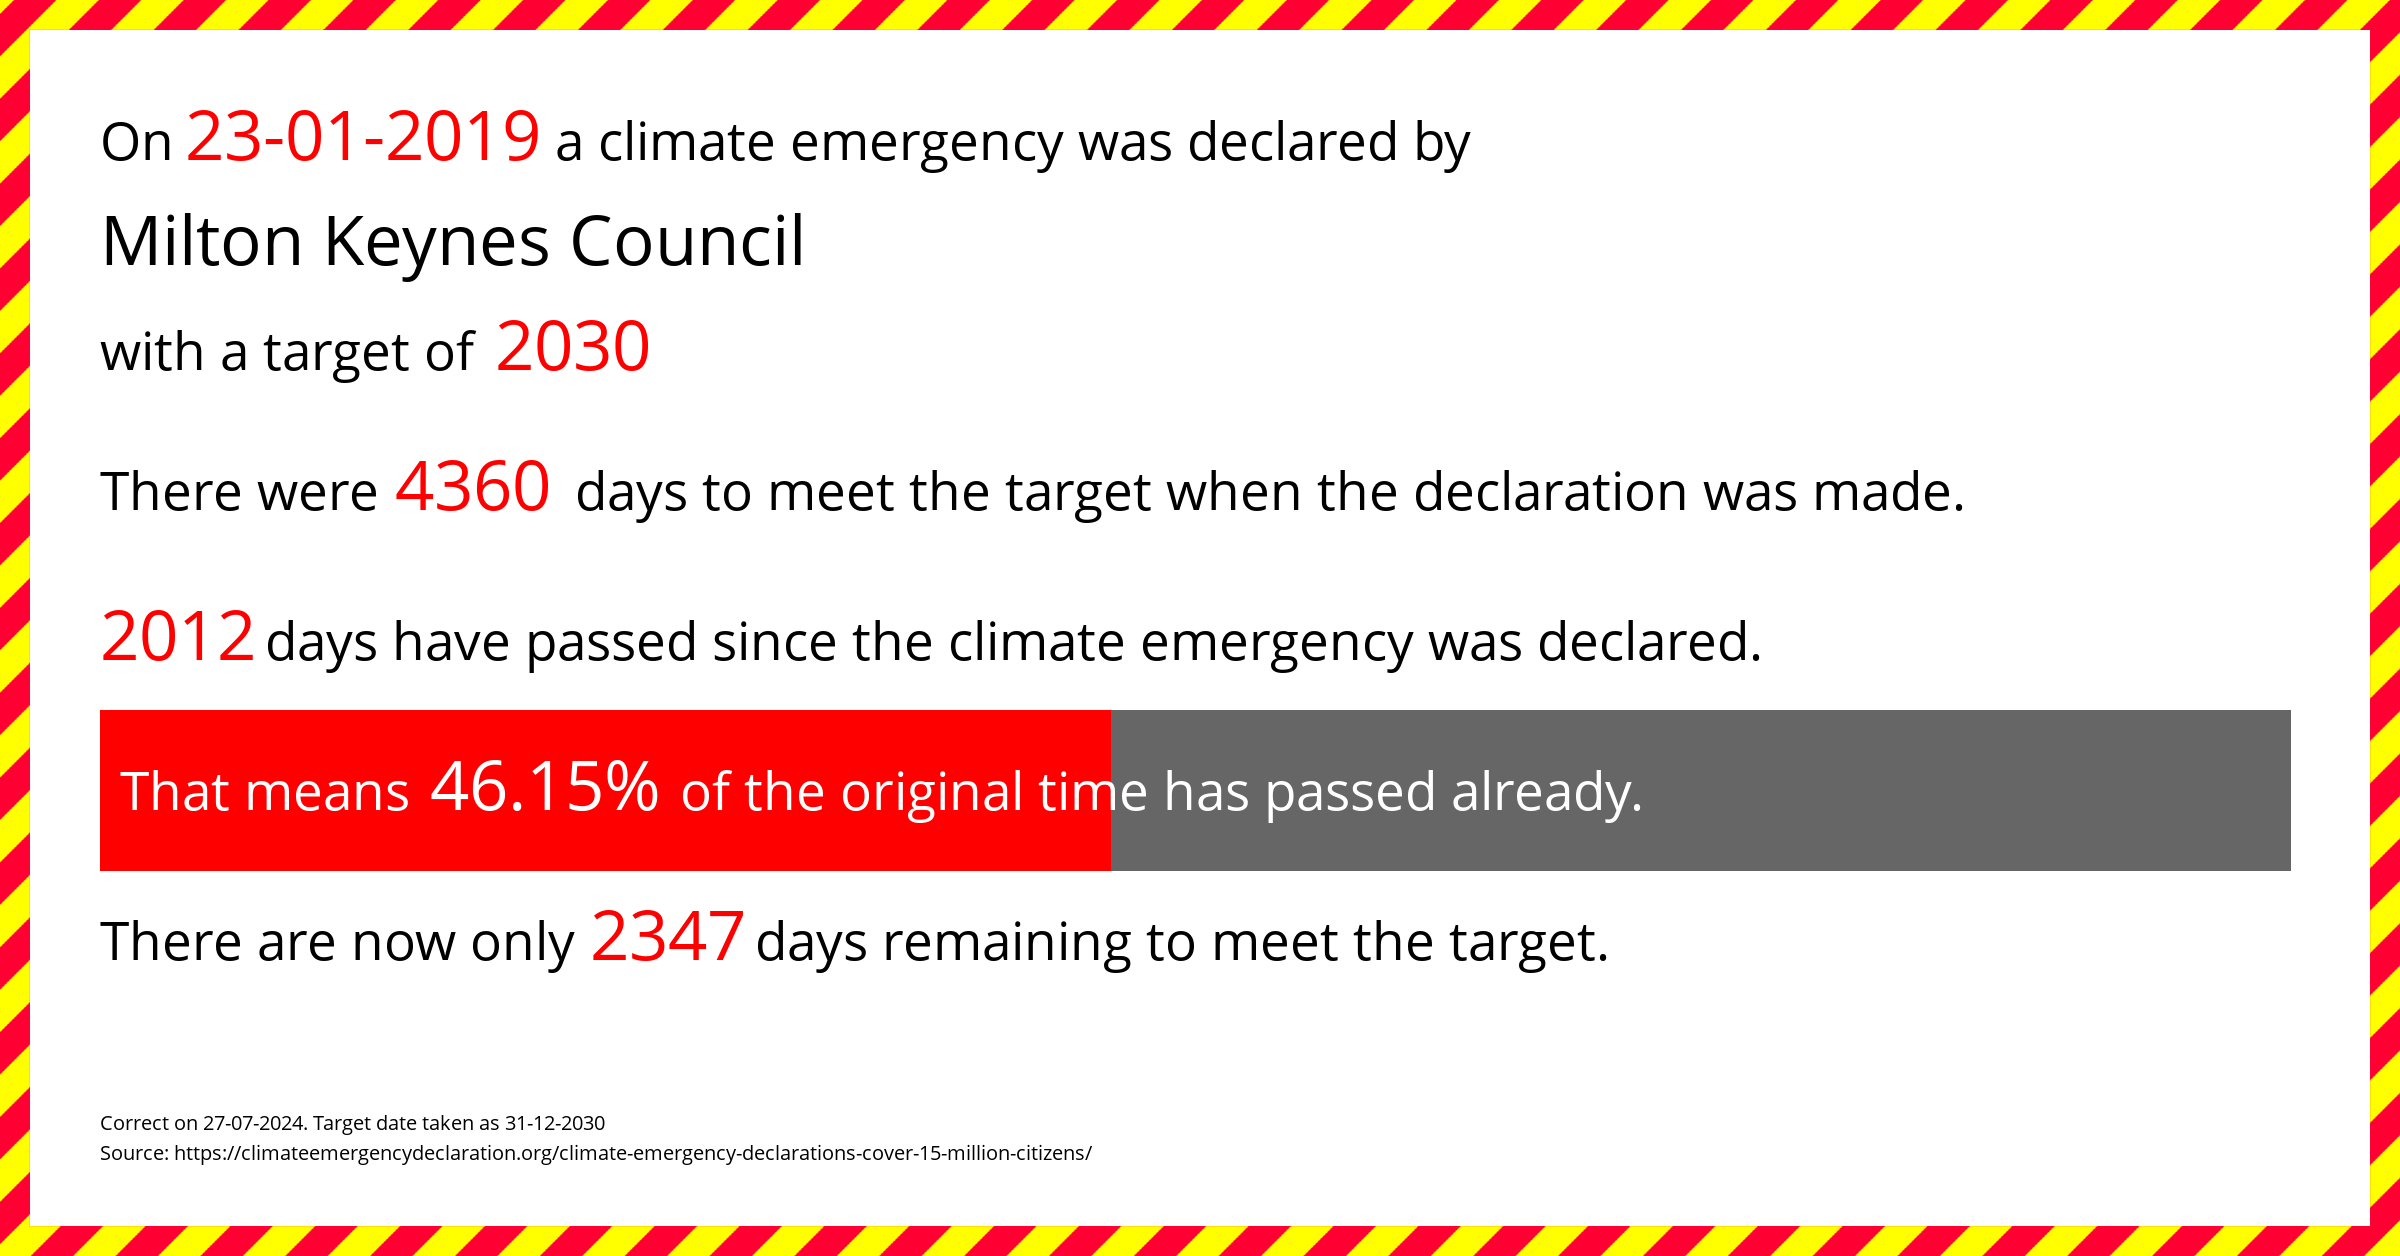 Milton Keynes Council declared a Climate emergency on Wednesday 23rd January 2019, with a target of 2030.